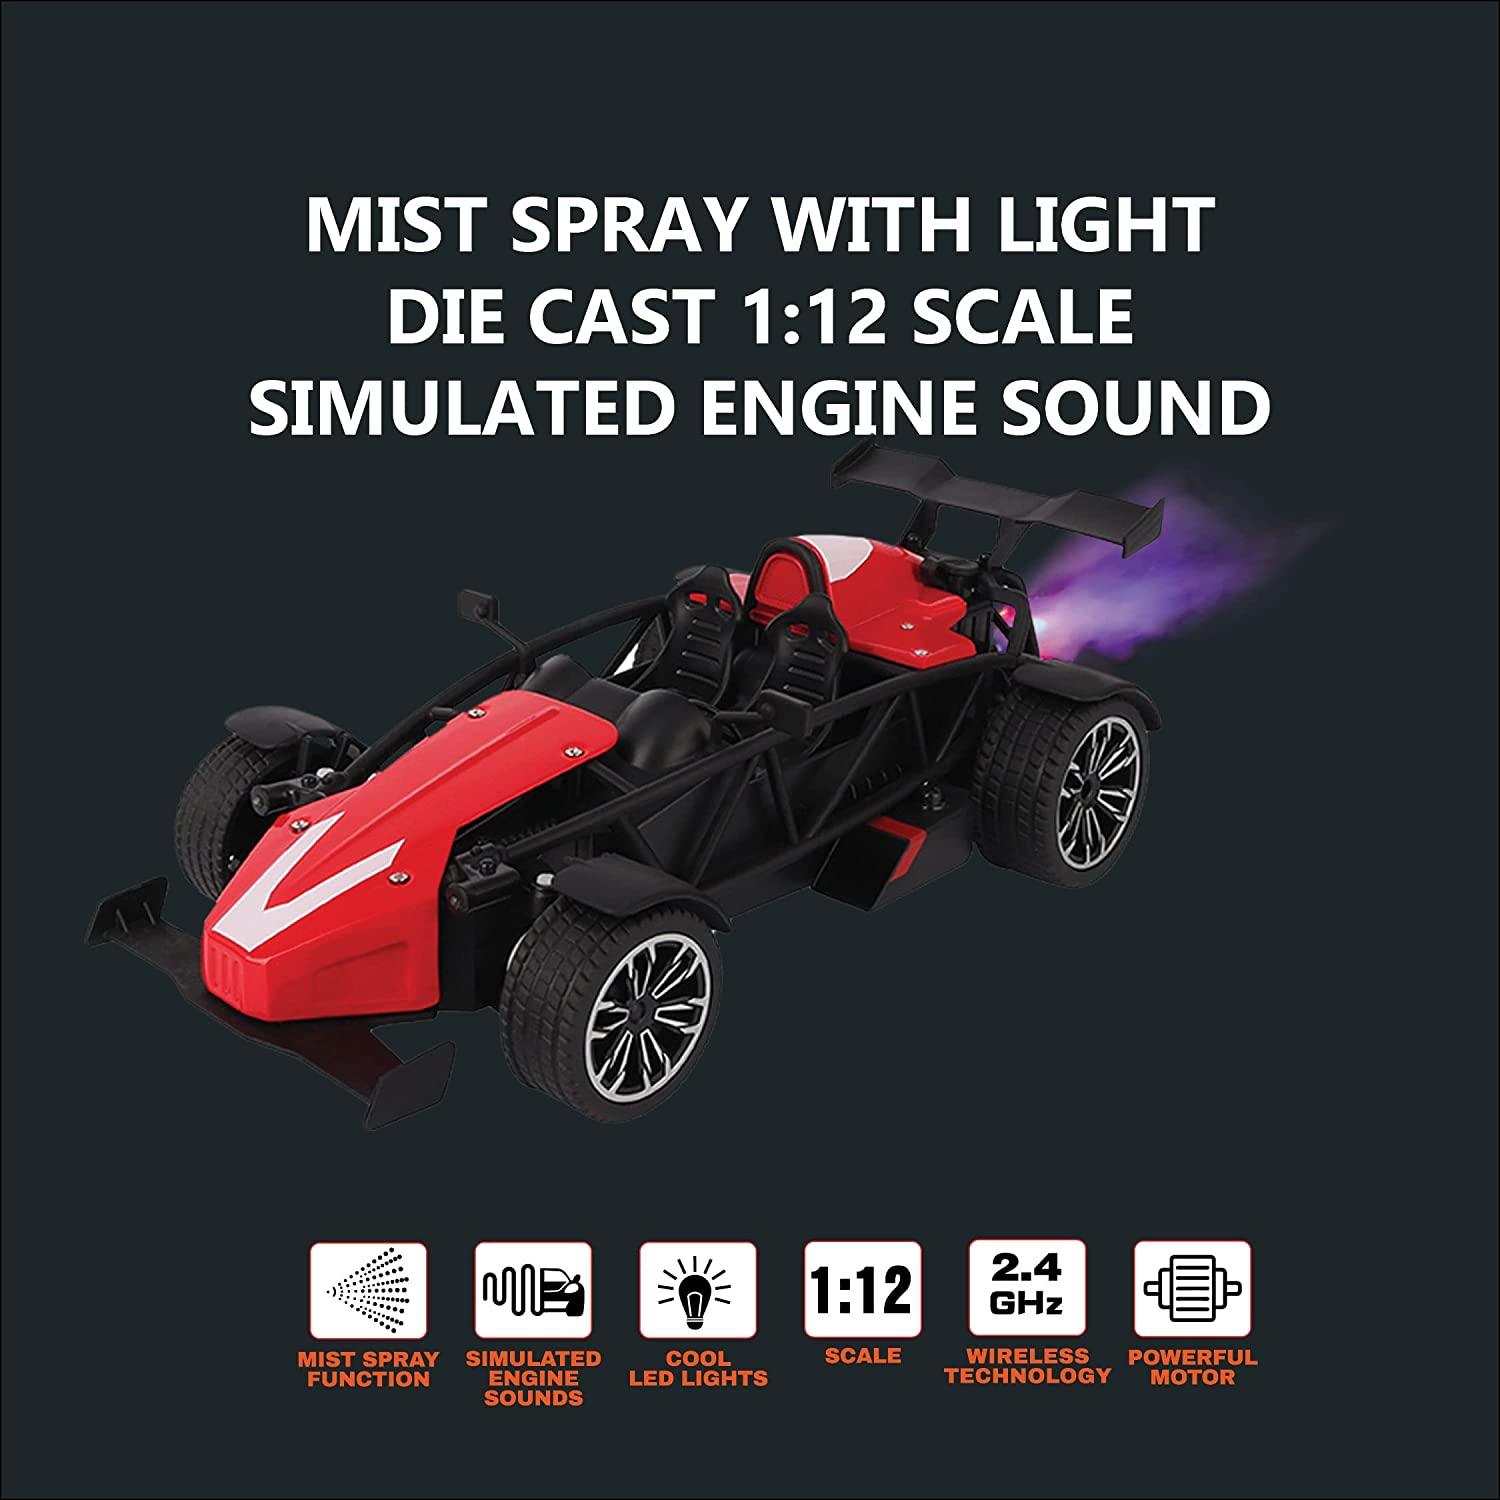 Playzu F1 Remote Control Die Cast With Mist Spray Racing Car – Red - FunCorp India